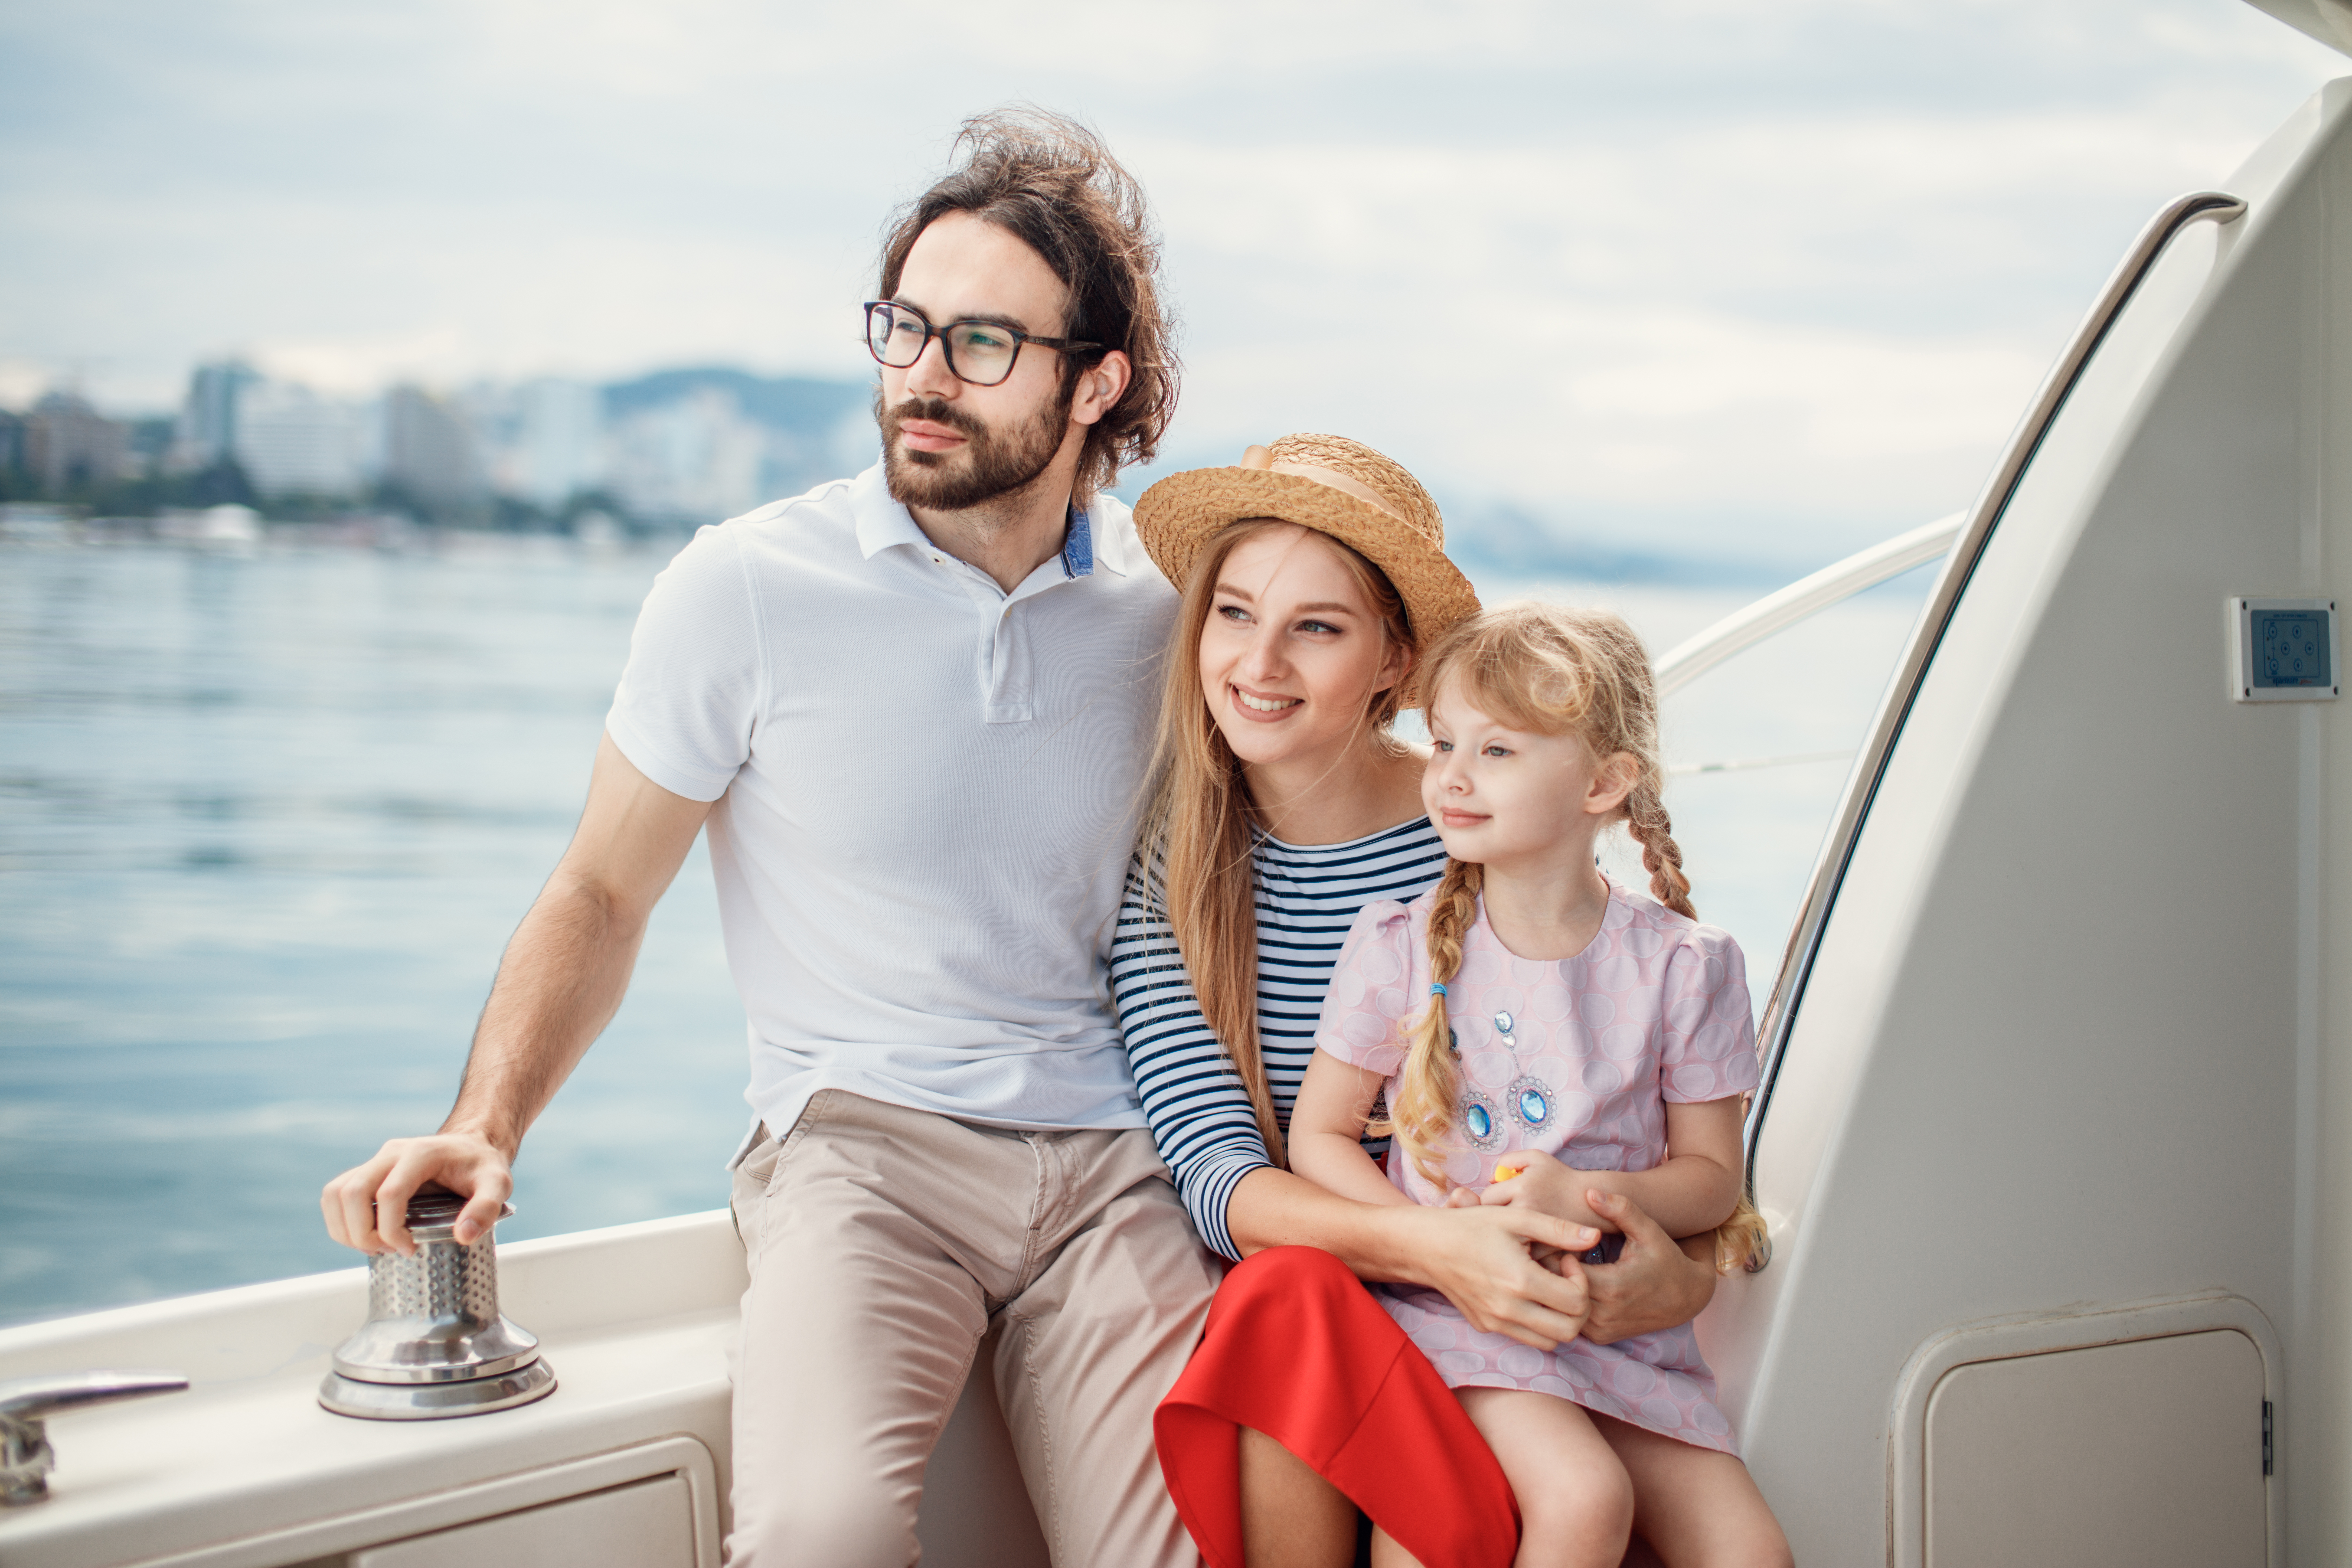 A family on vacation | Source: Shutterstock